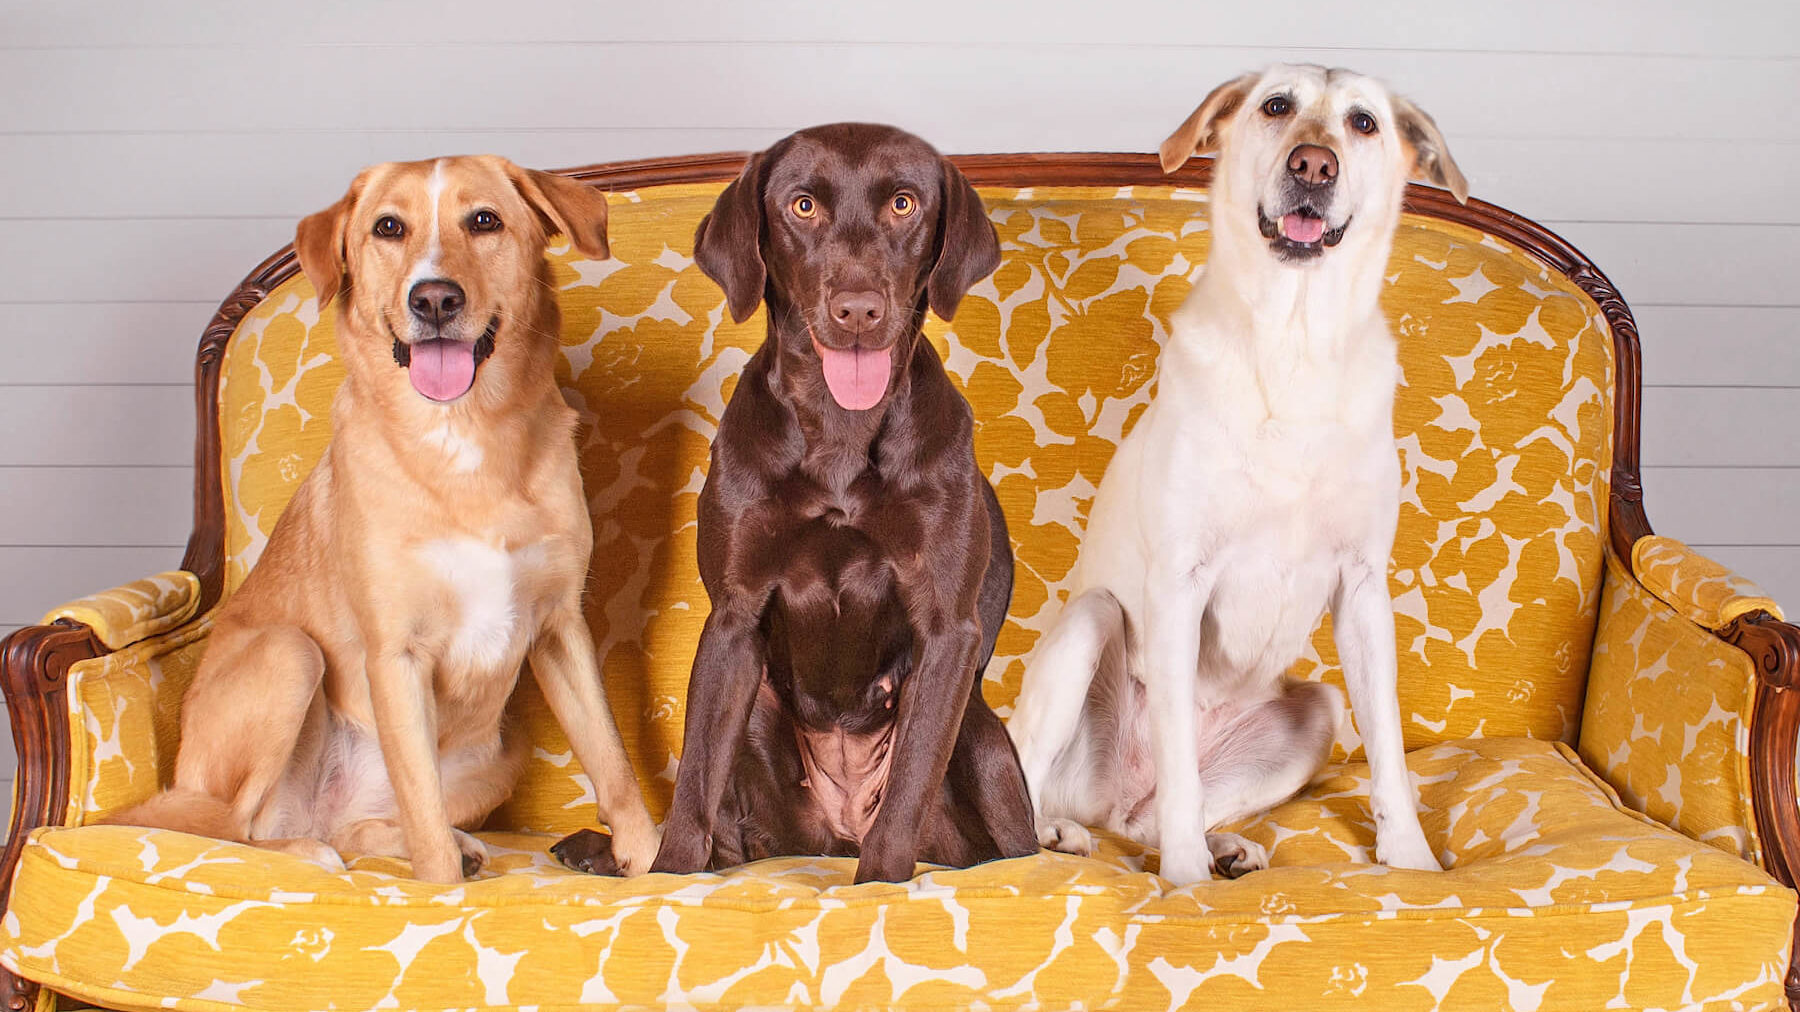 Three Labradors of varied colors sitting on a gold Victorian sofa.